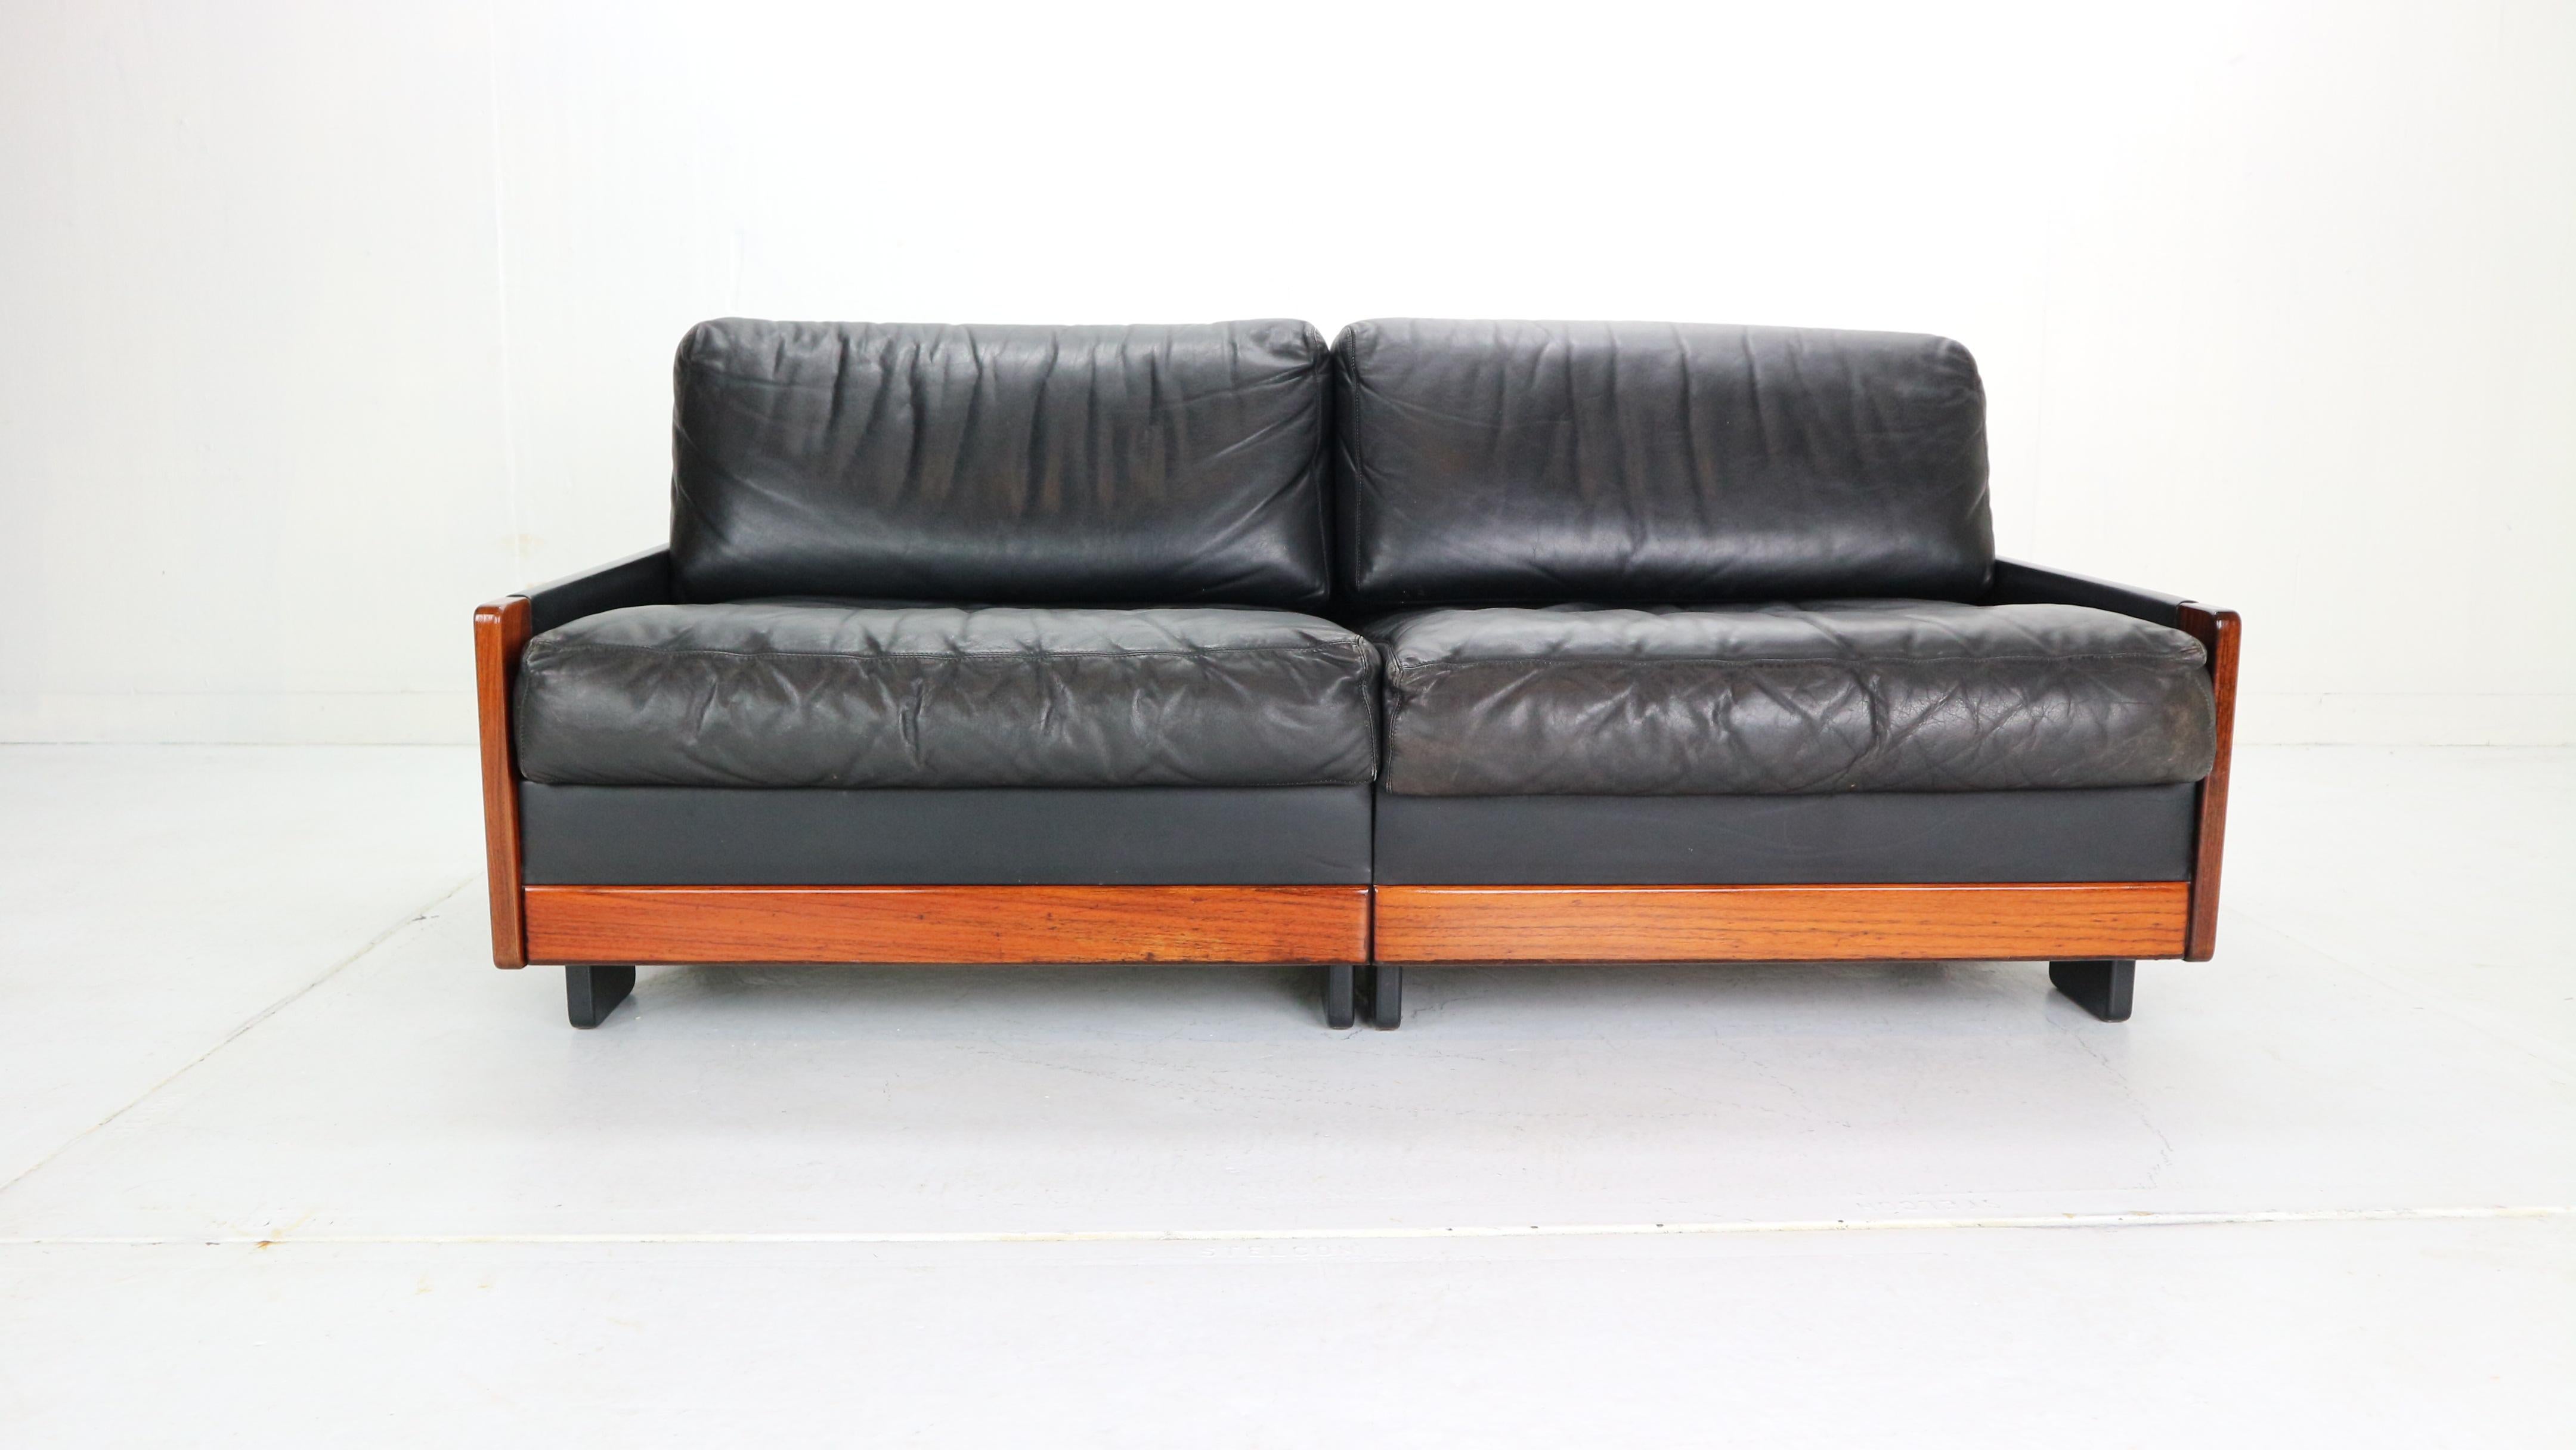 Two-seat sofa was produced by Cassina in 1960s and designed by Afra and Tobia Scarpa.
Mid-Century Modern period Italian design item.
Rosewood frame with a high quality black leather covering the sides, back, seating and back cushions.
Model